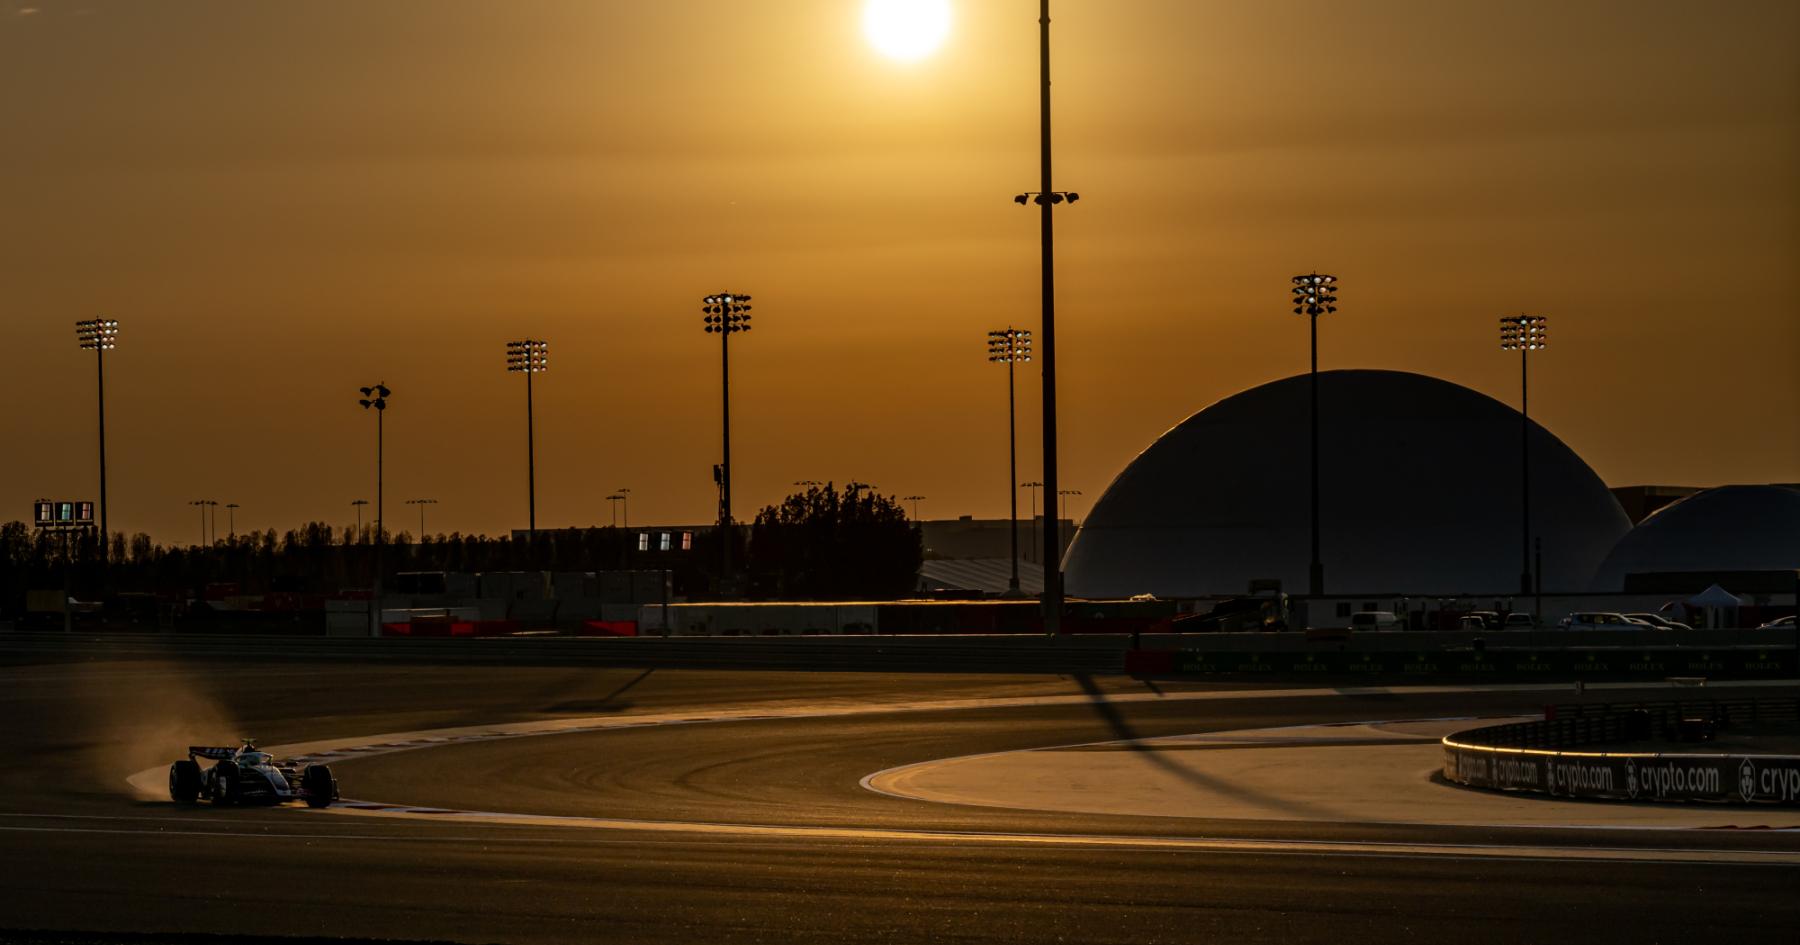 Capturing Speed and Precision: The Top 10 Images from F1 Pre-Season Testing